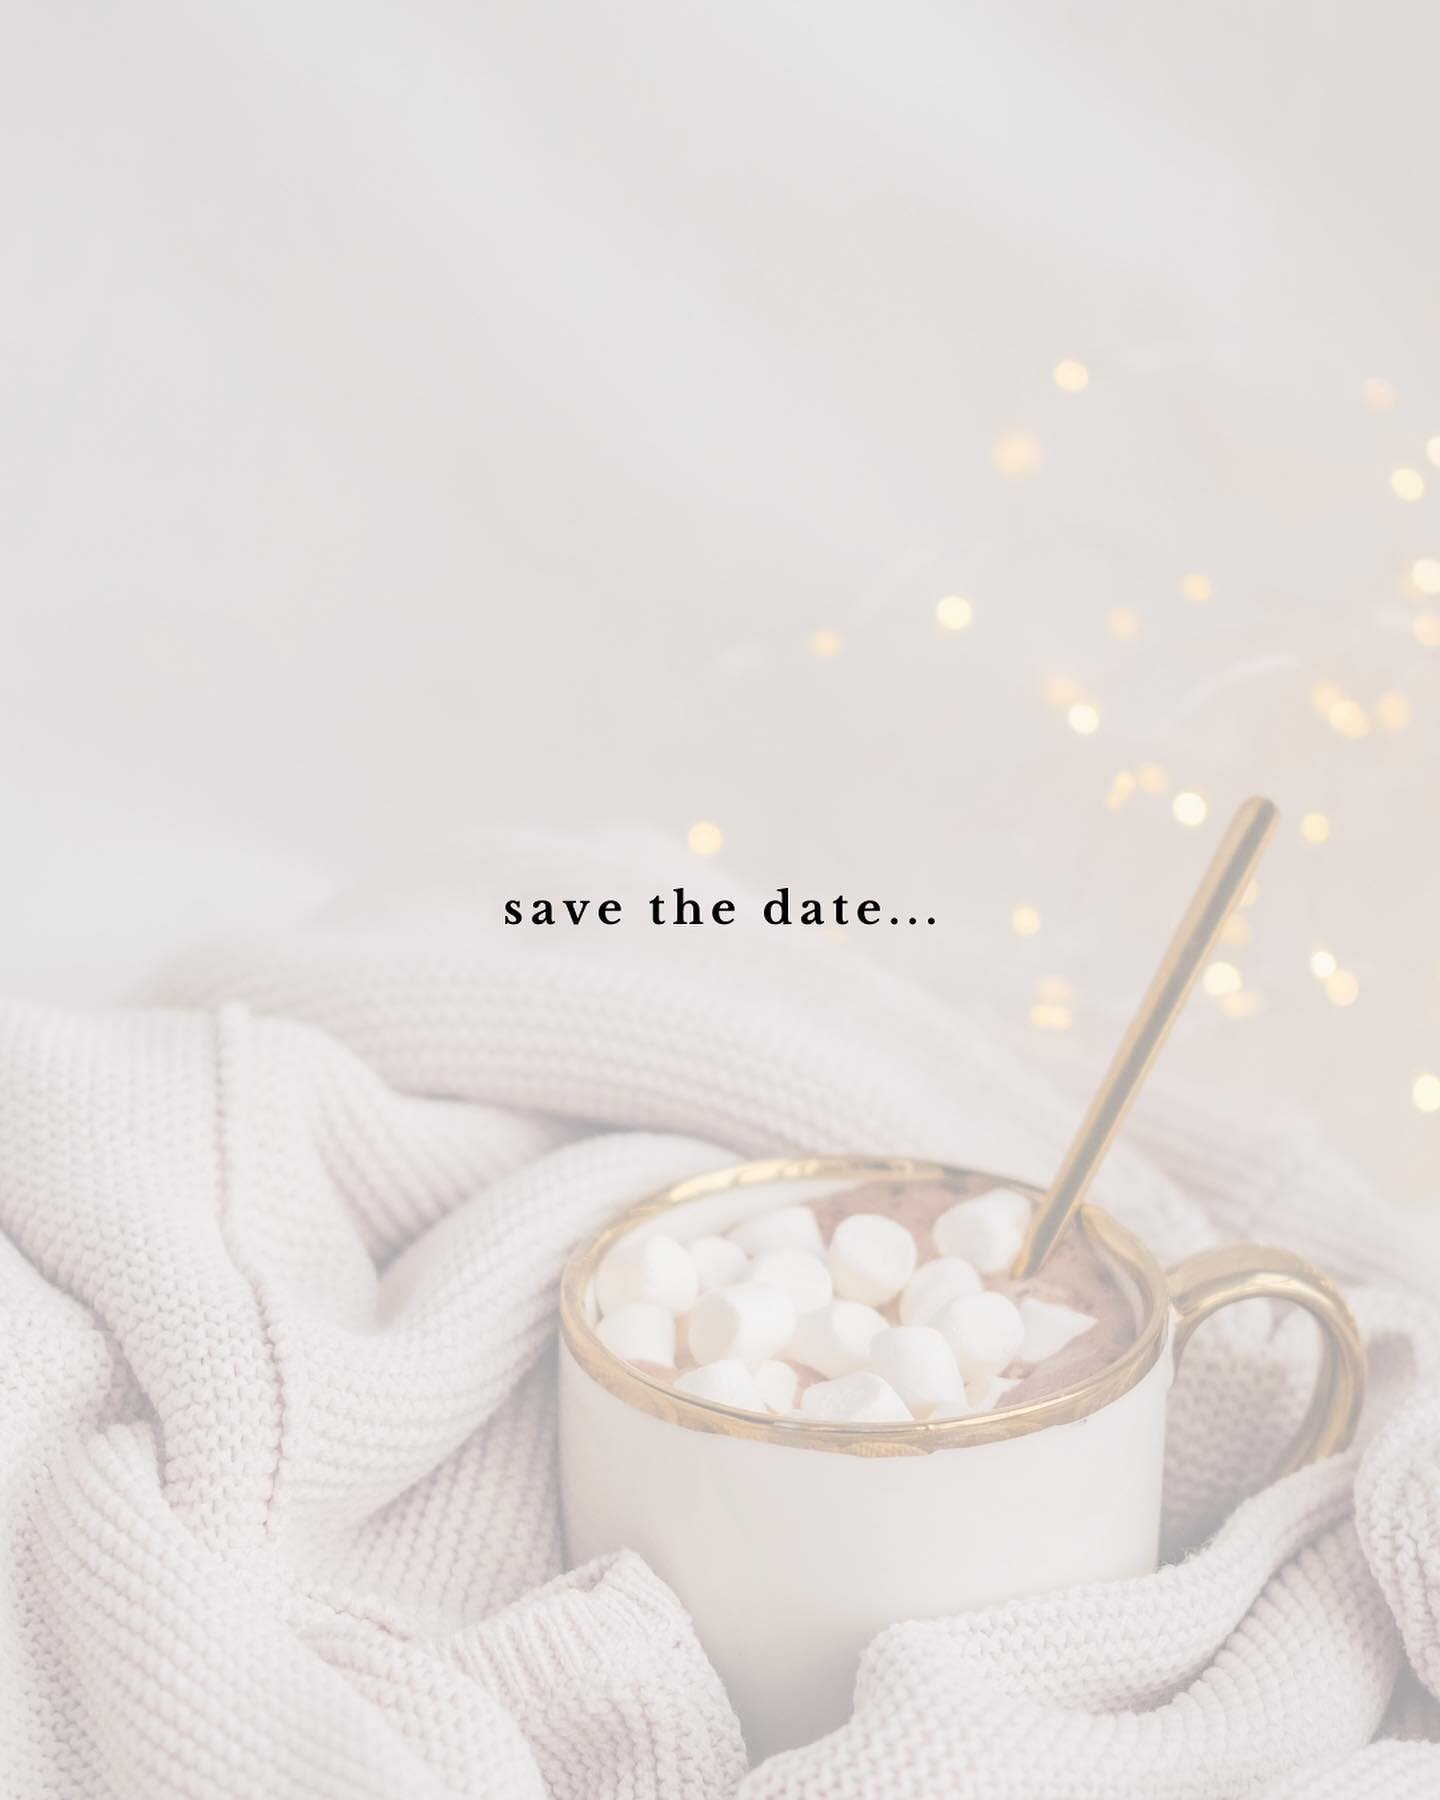 ✨ Save the date &mdash; Saturday, 13th January 2024 ✨

Welcome the new year and reset for the new season with a nourishing, cosy and wholesome mini wellness retreat. More details to come soon, I can&rsquo;t wait to share it all with you. 

To keep up